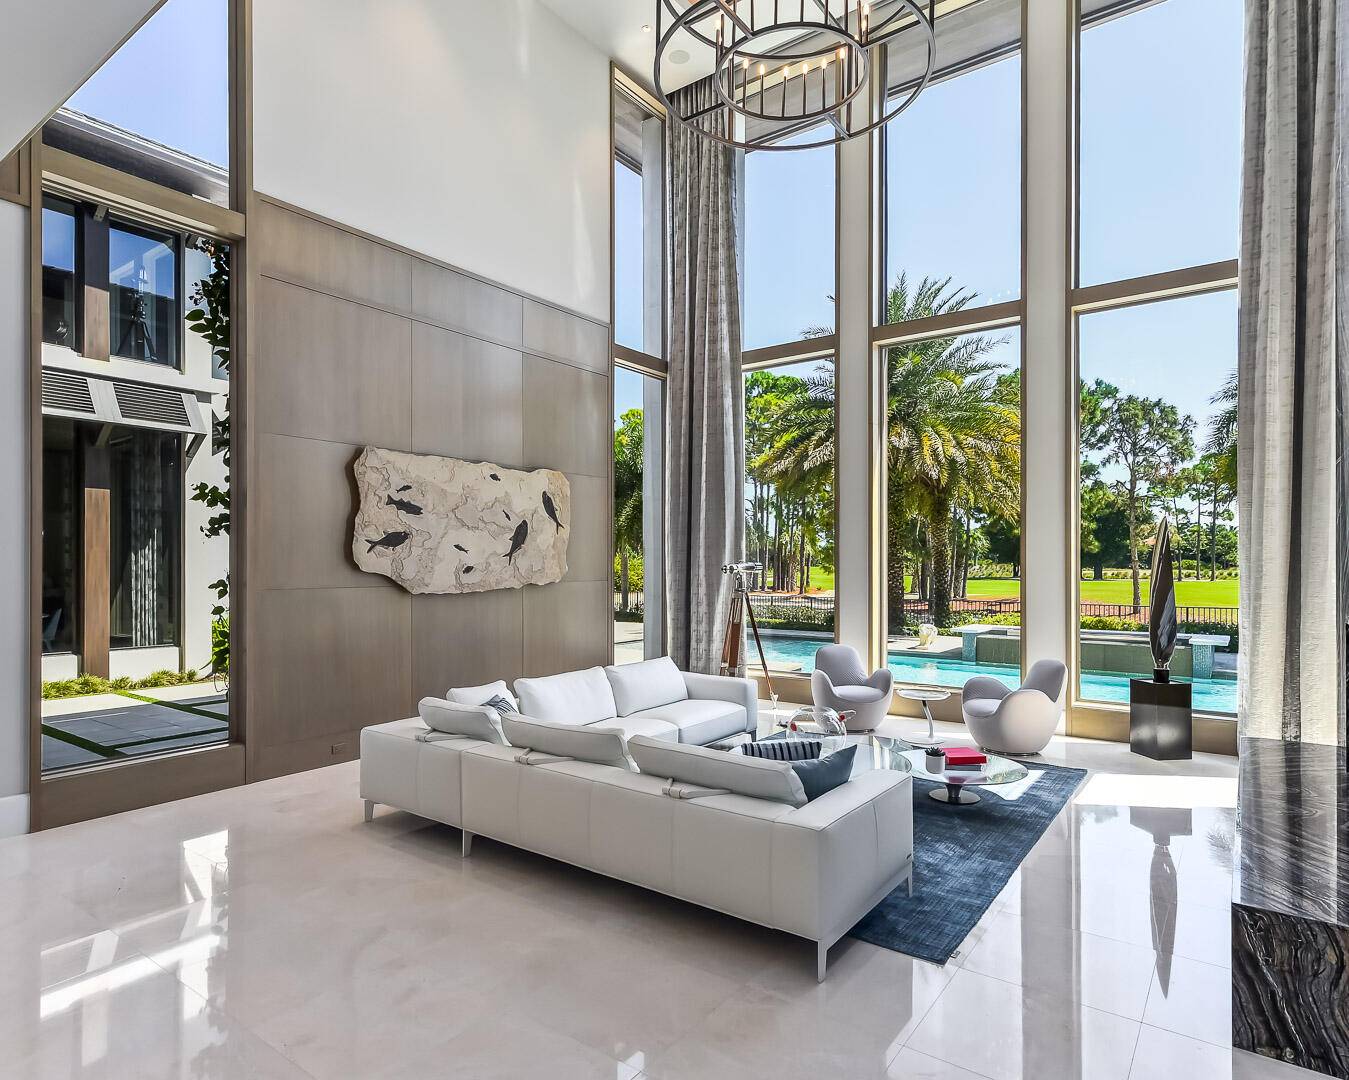 Exquisitely designed, this contemporary residence is the height of elegance and sophistication.